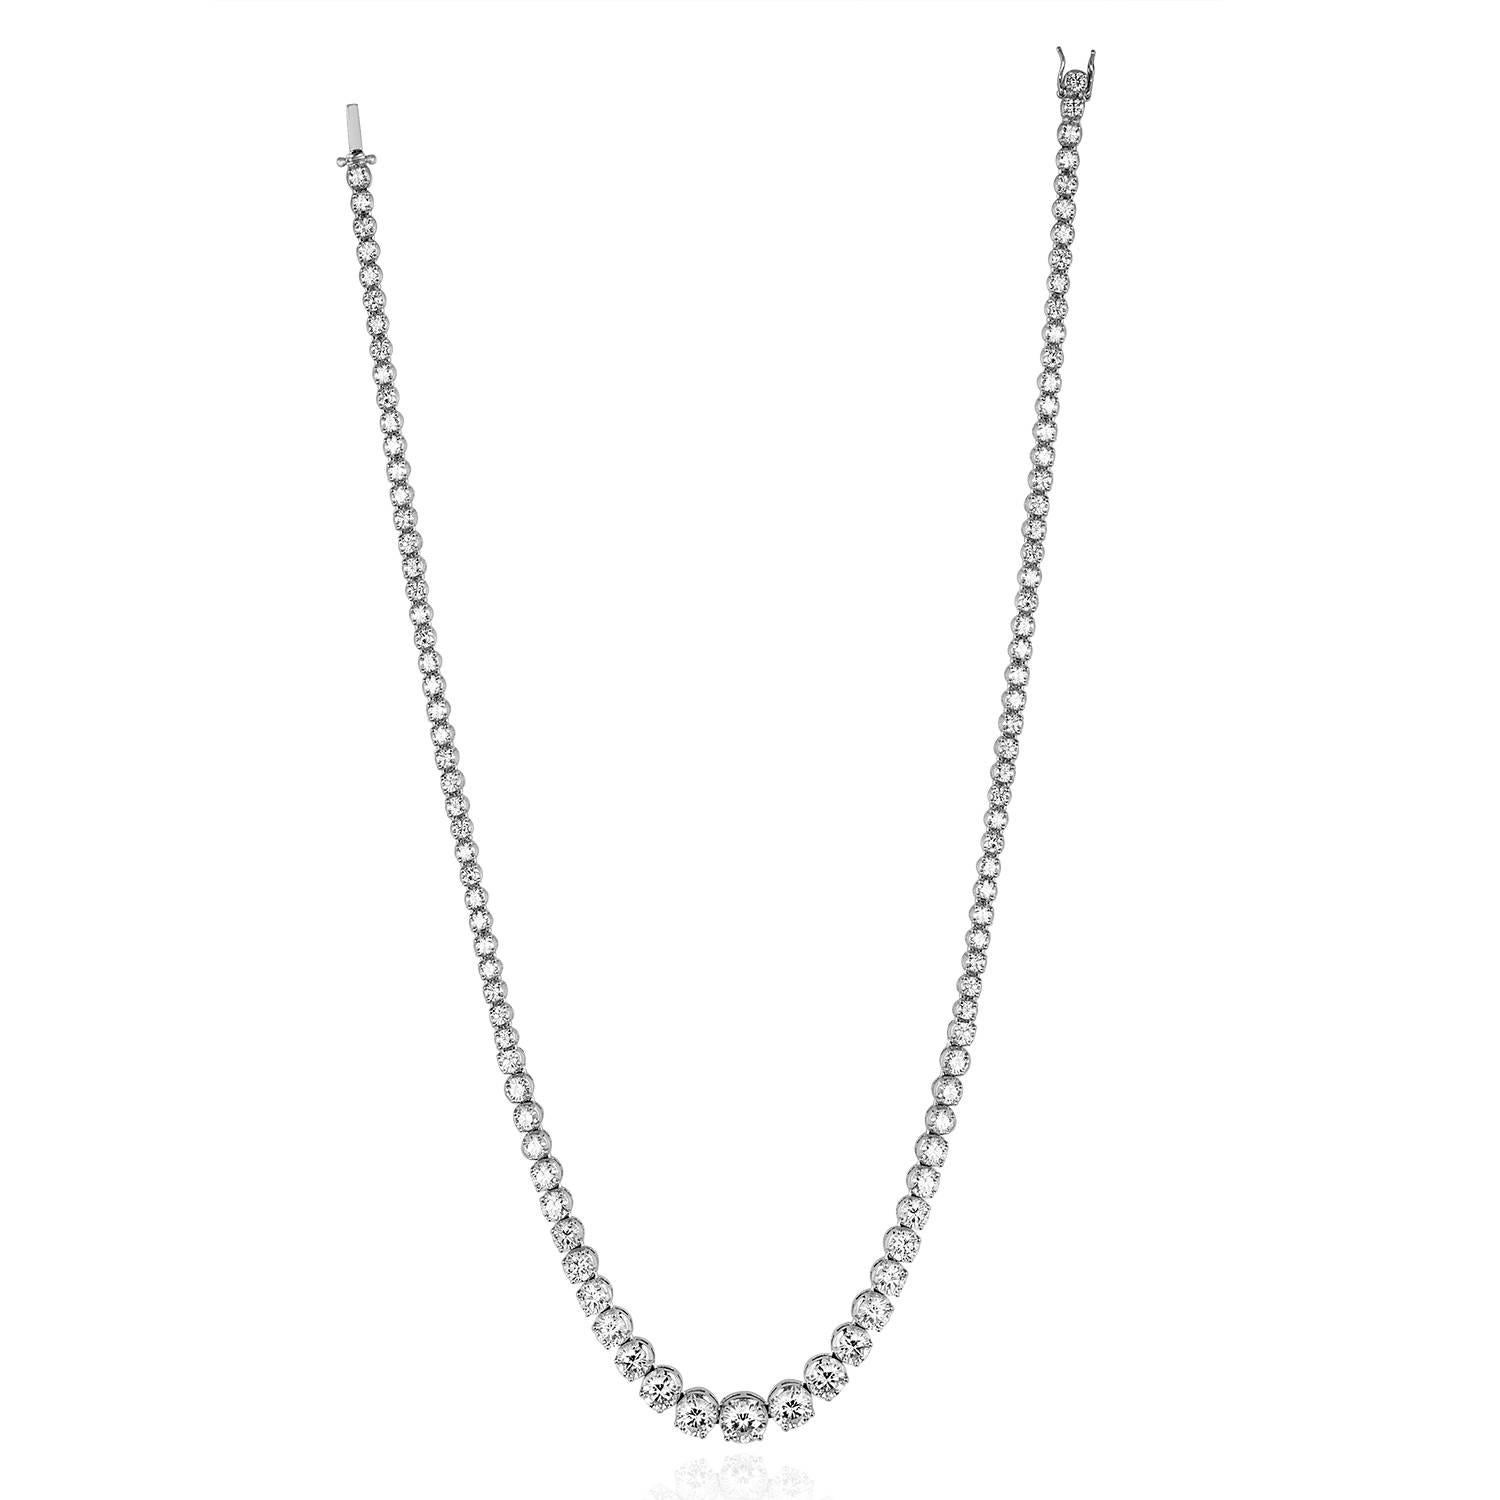 Very Classic Riviere Necklace
The necklace is 18K White Gold
There are 13.10Ct in Diamonds G/H VS
The necklace weighs 27.7 grams
The necklace is 16